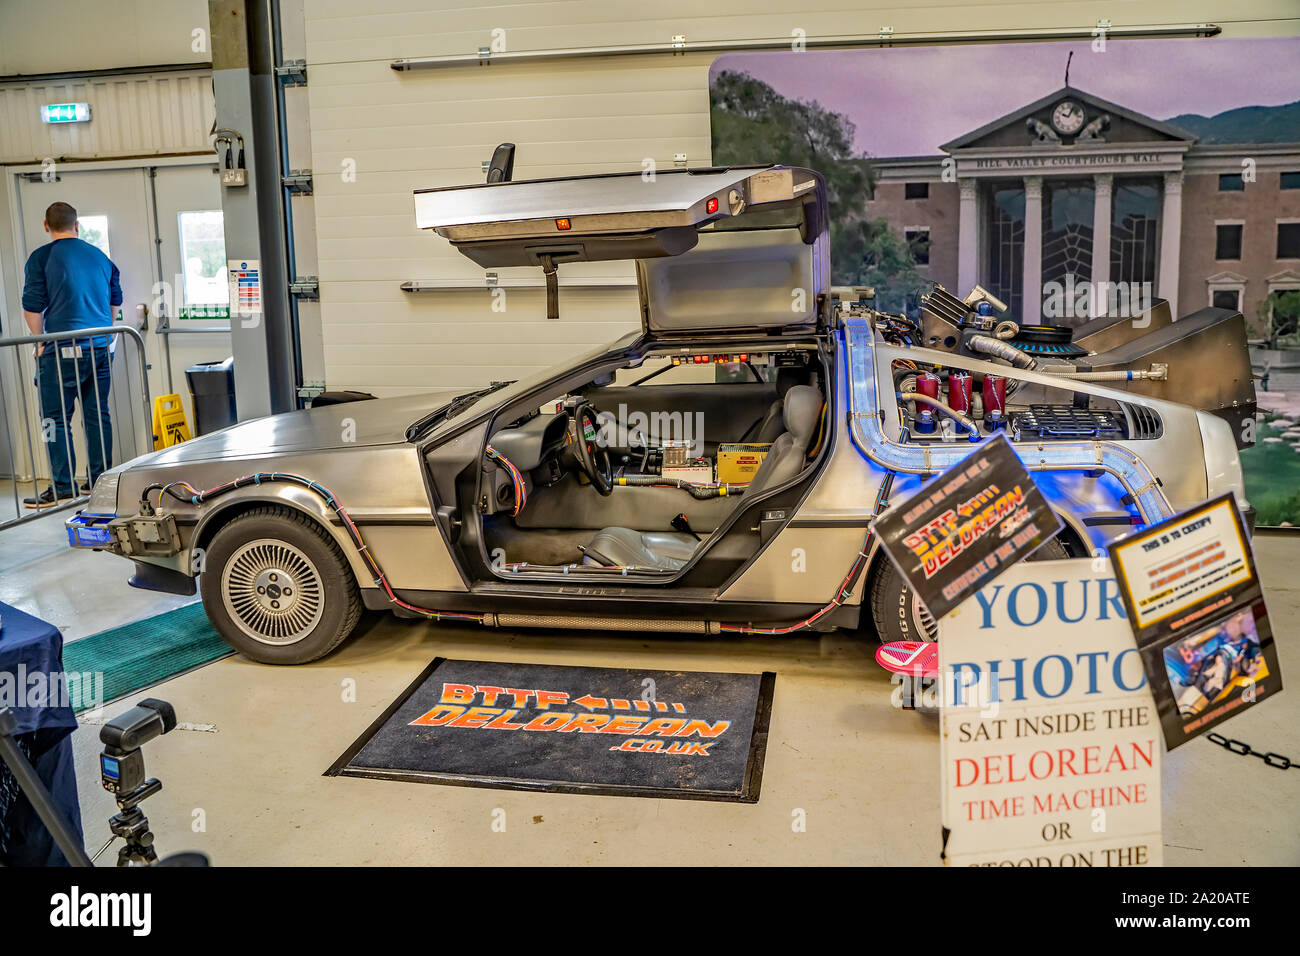 A replica of the Delorean car used in the Back to The Future movies on  display at the annual Nor-Con movie and comic book convention Stock Photo -  Alamy